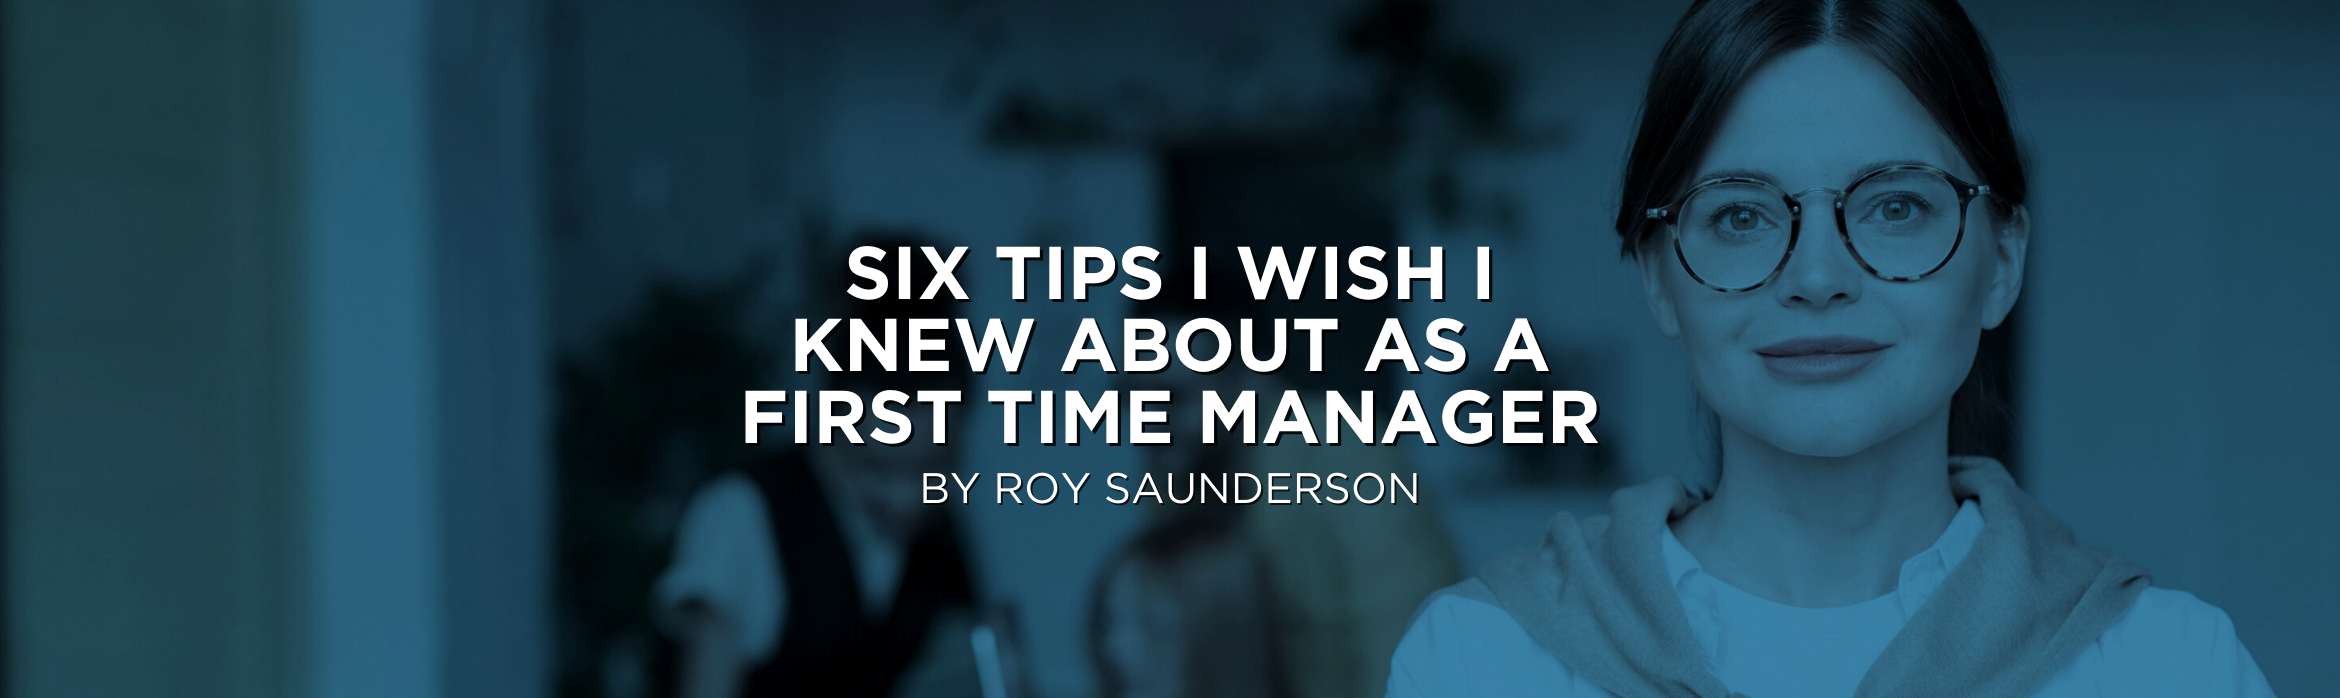 Six Tips I Wish I Knew About as a First Time Manager